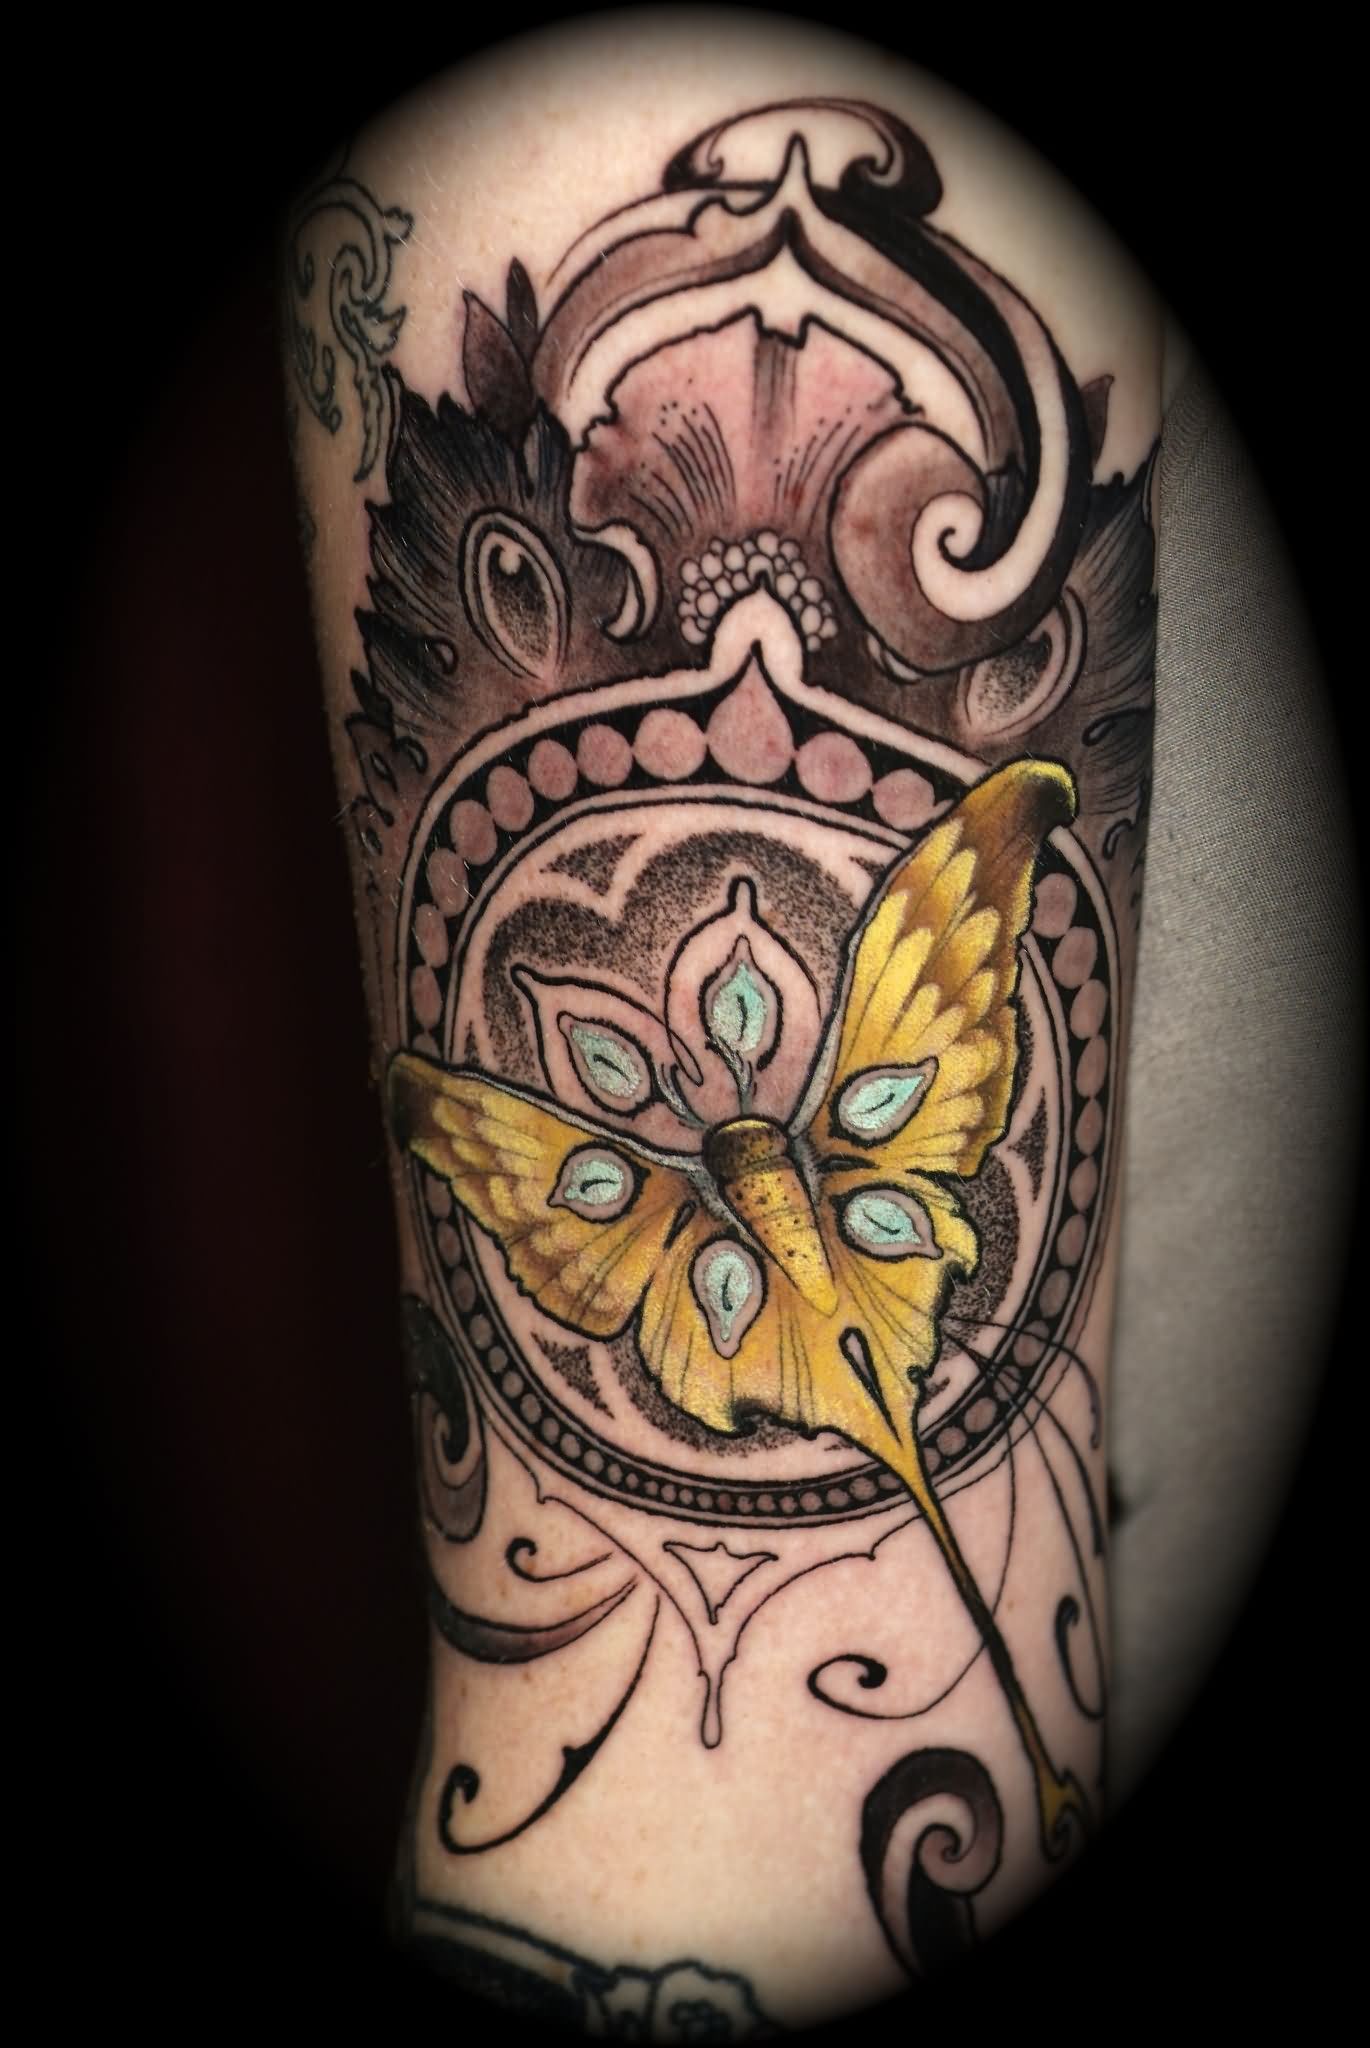 Unique Butterfly Tattoo On Forearm By Ben Merrell